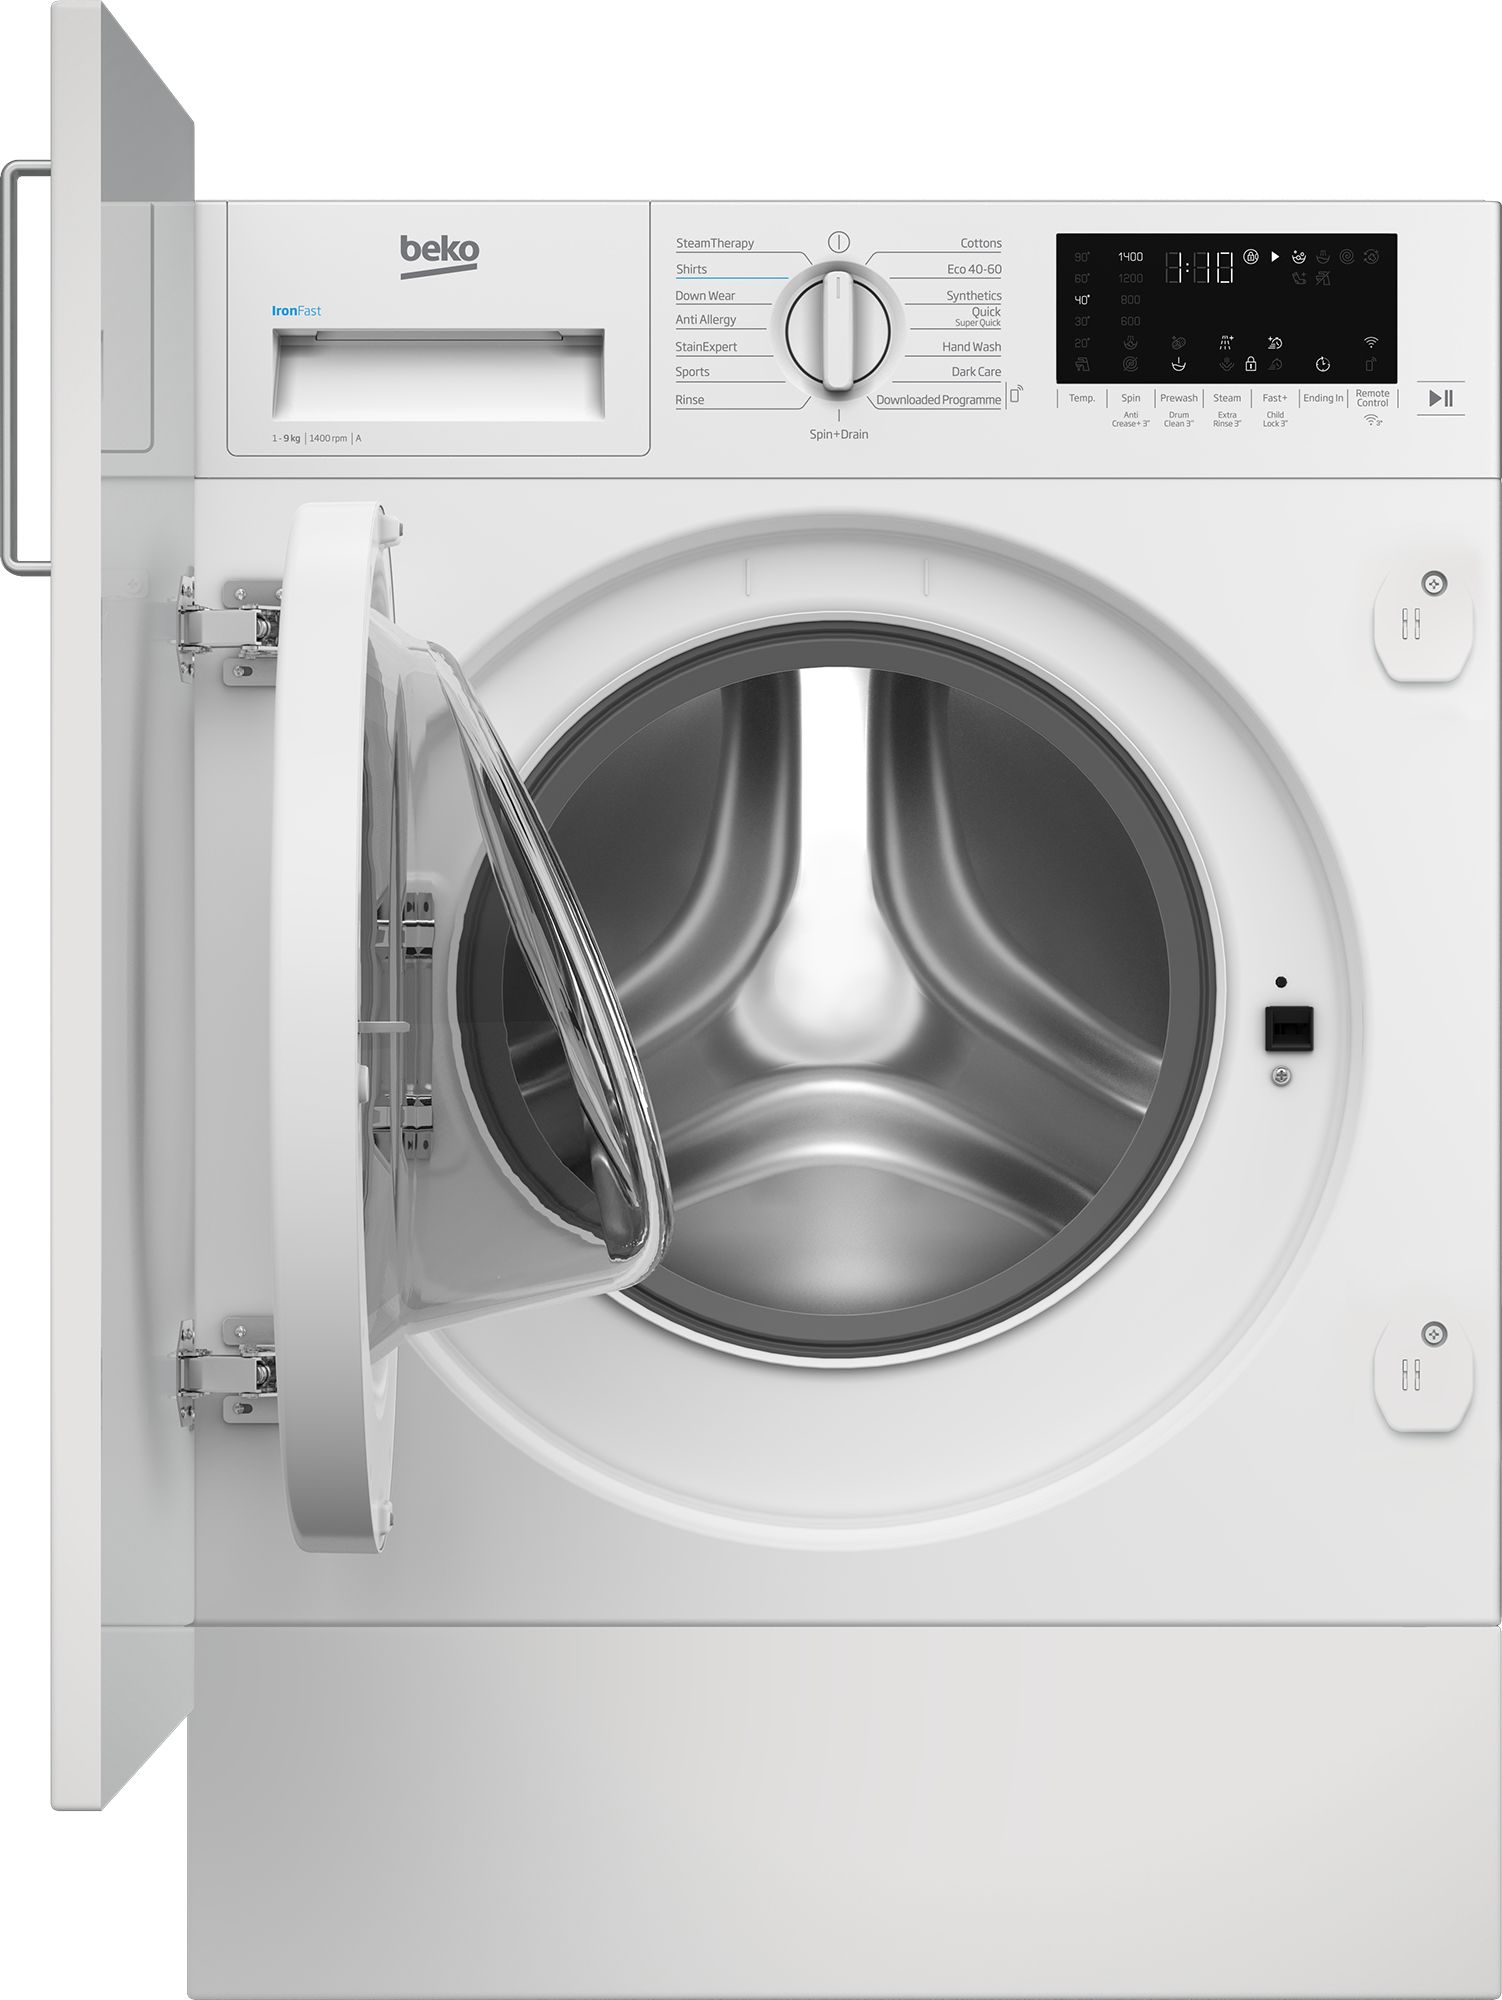 Beko RecycledTub WTIK94121F Integrated 9kg WiFi Connected Washing Machine with 1400 rpm - White - A Rated, White